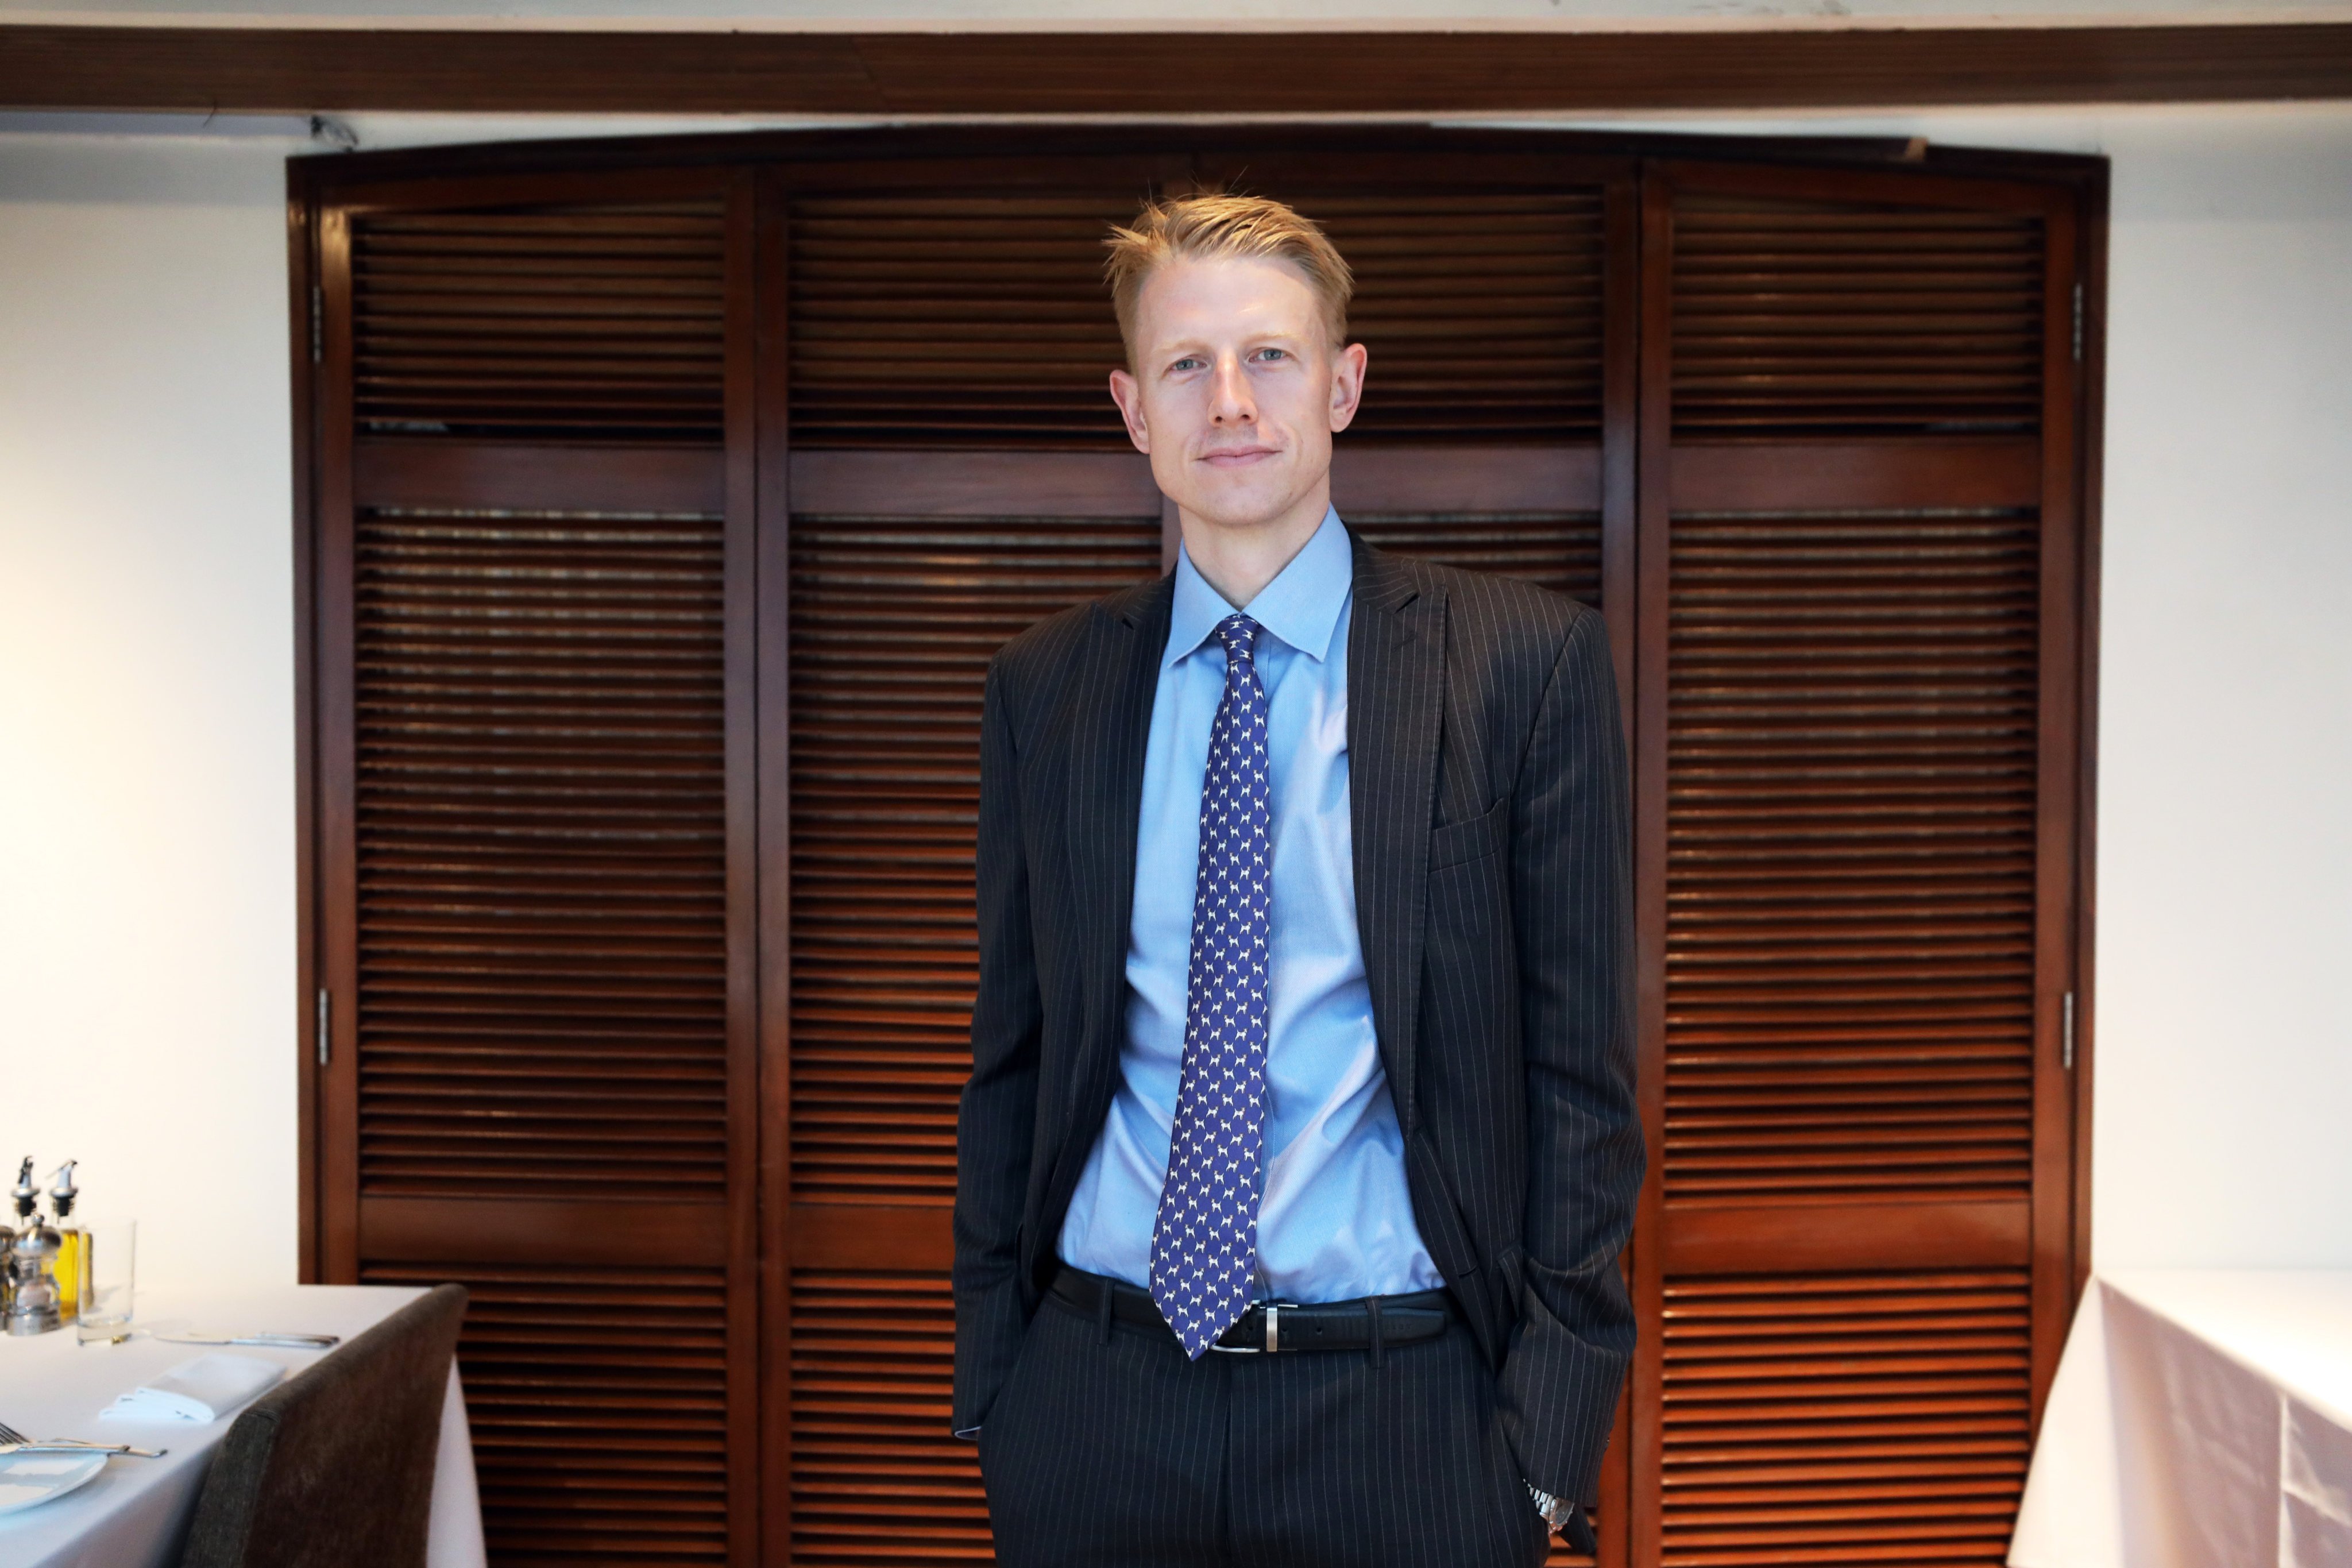 Max Johnson poses for portrait at Foreign Correspondents’ Club (FCC), Central. Max Johnson is the youngest brother of former British Prime Minister Boris Johnson. He has lived in Hong Kong since 2021. 27MAR24 SCMP / Sun Yeung